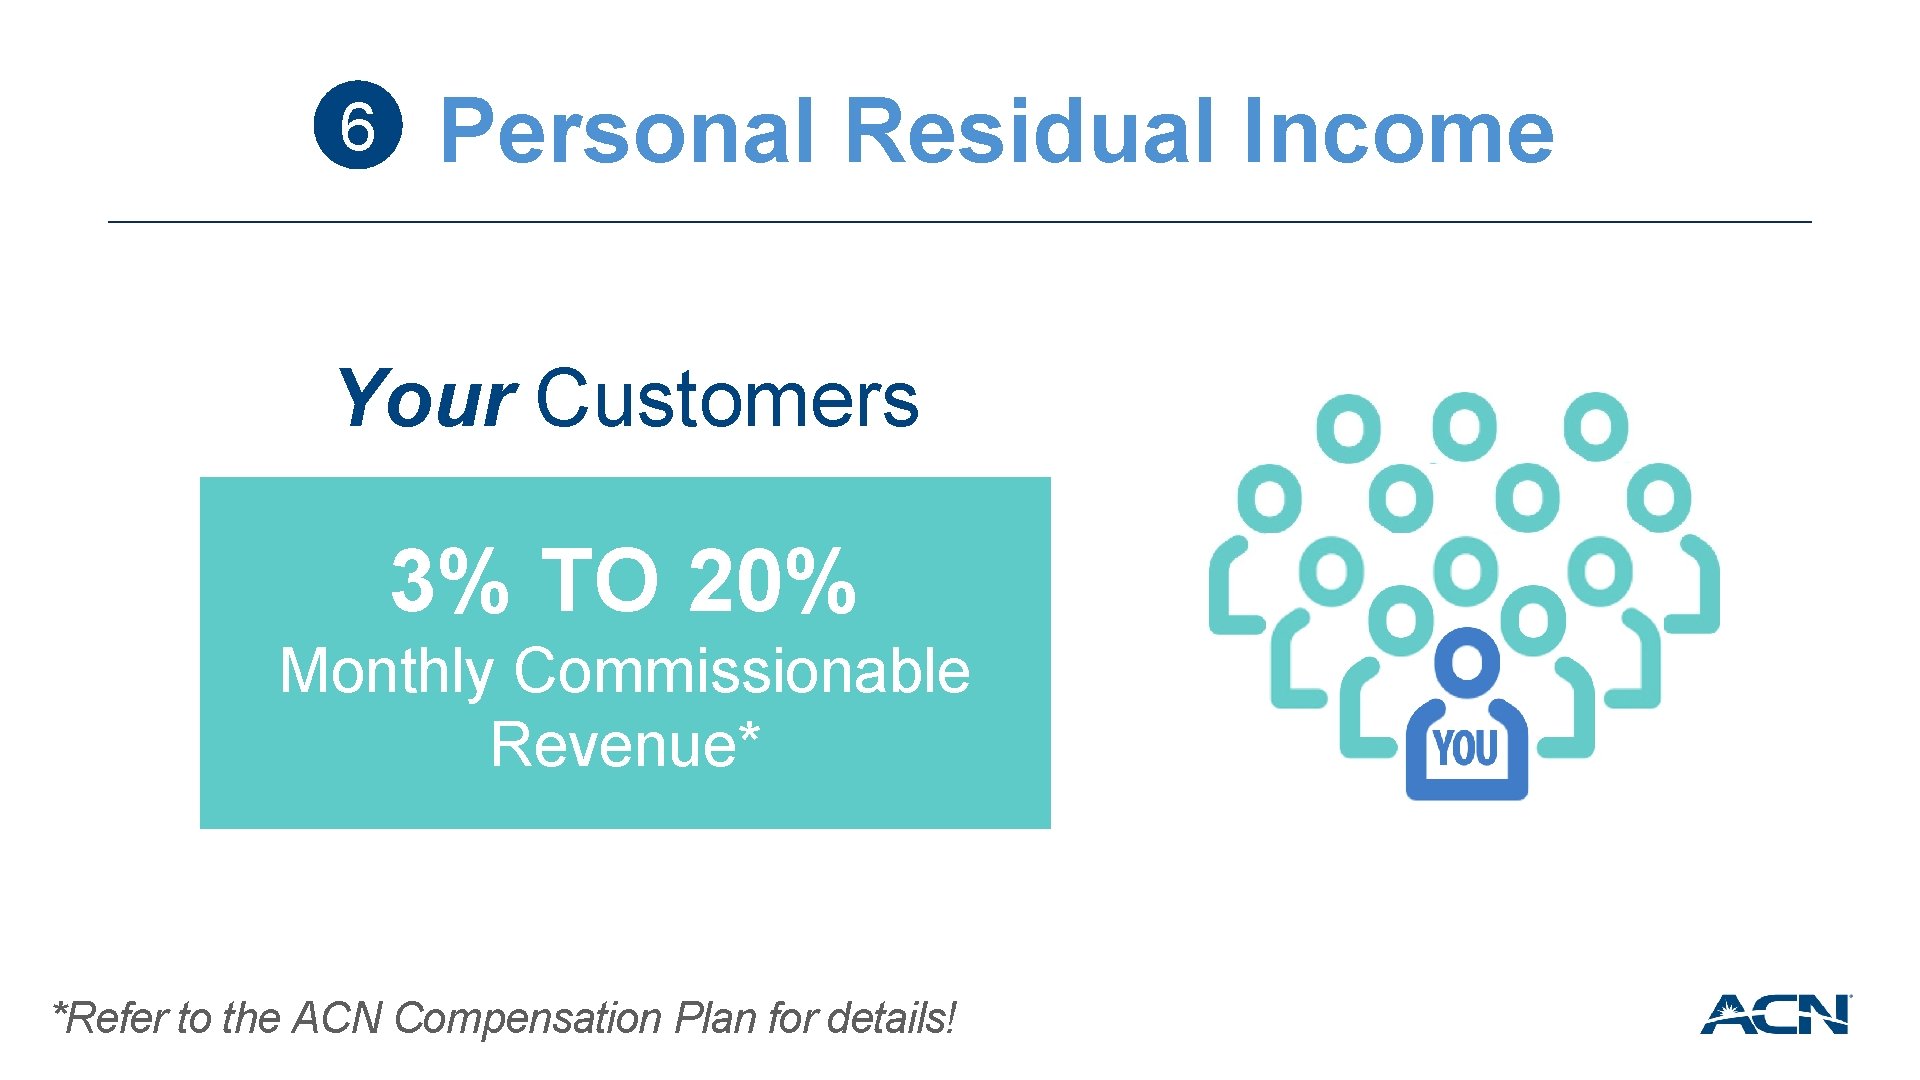 6 Personal Residual Income Your Customers 3% TO 20% Monthly Commissionable Revenue* *Refer to